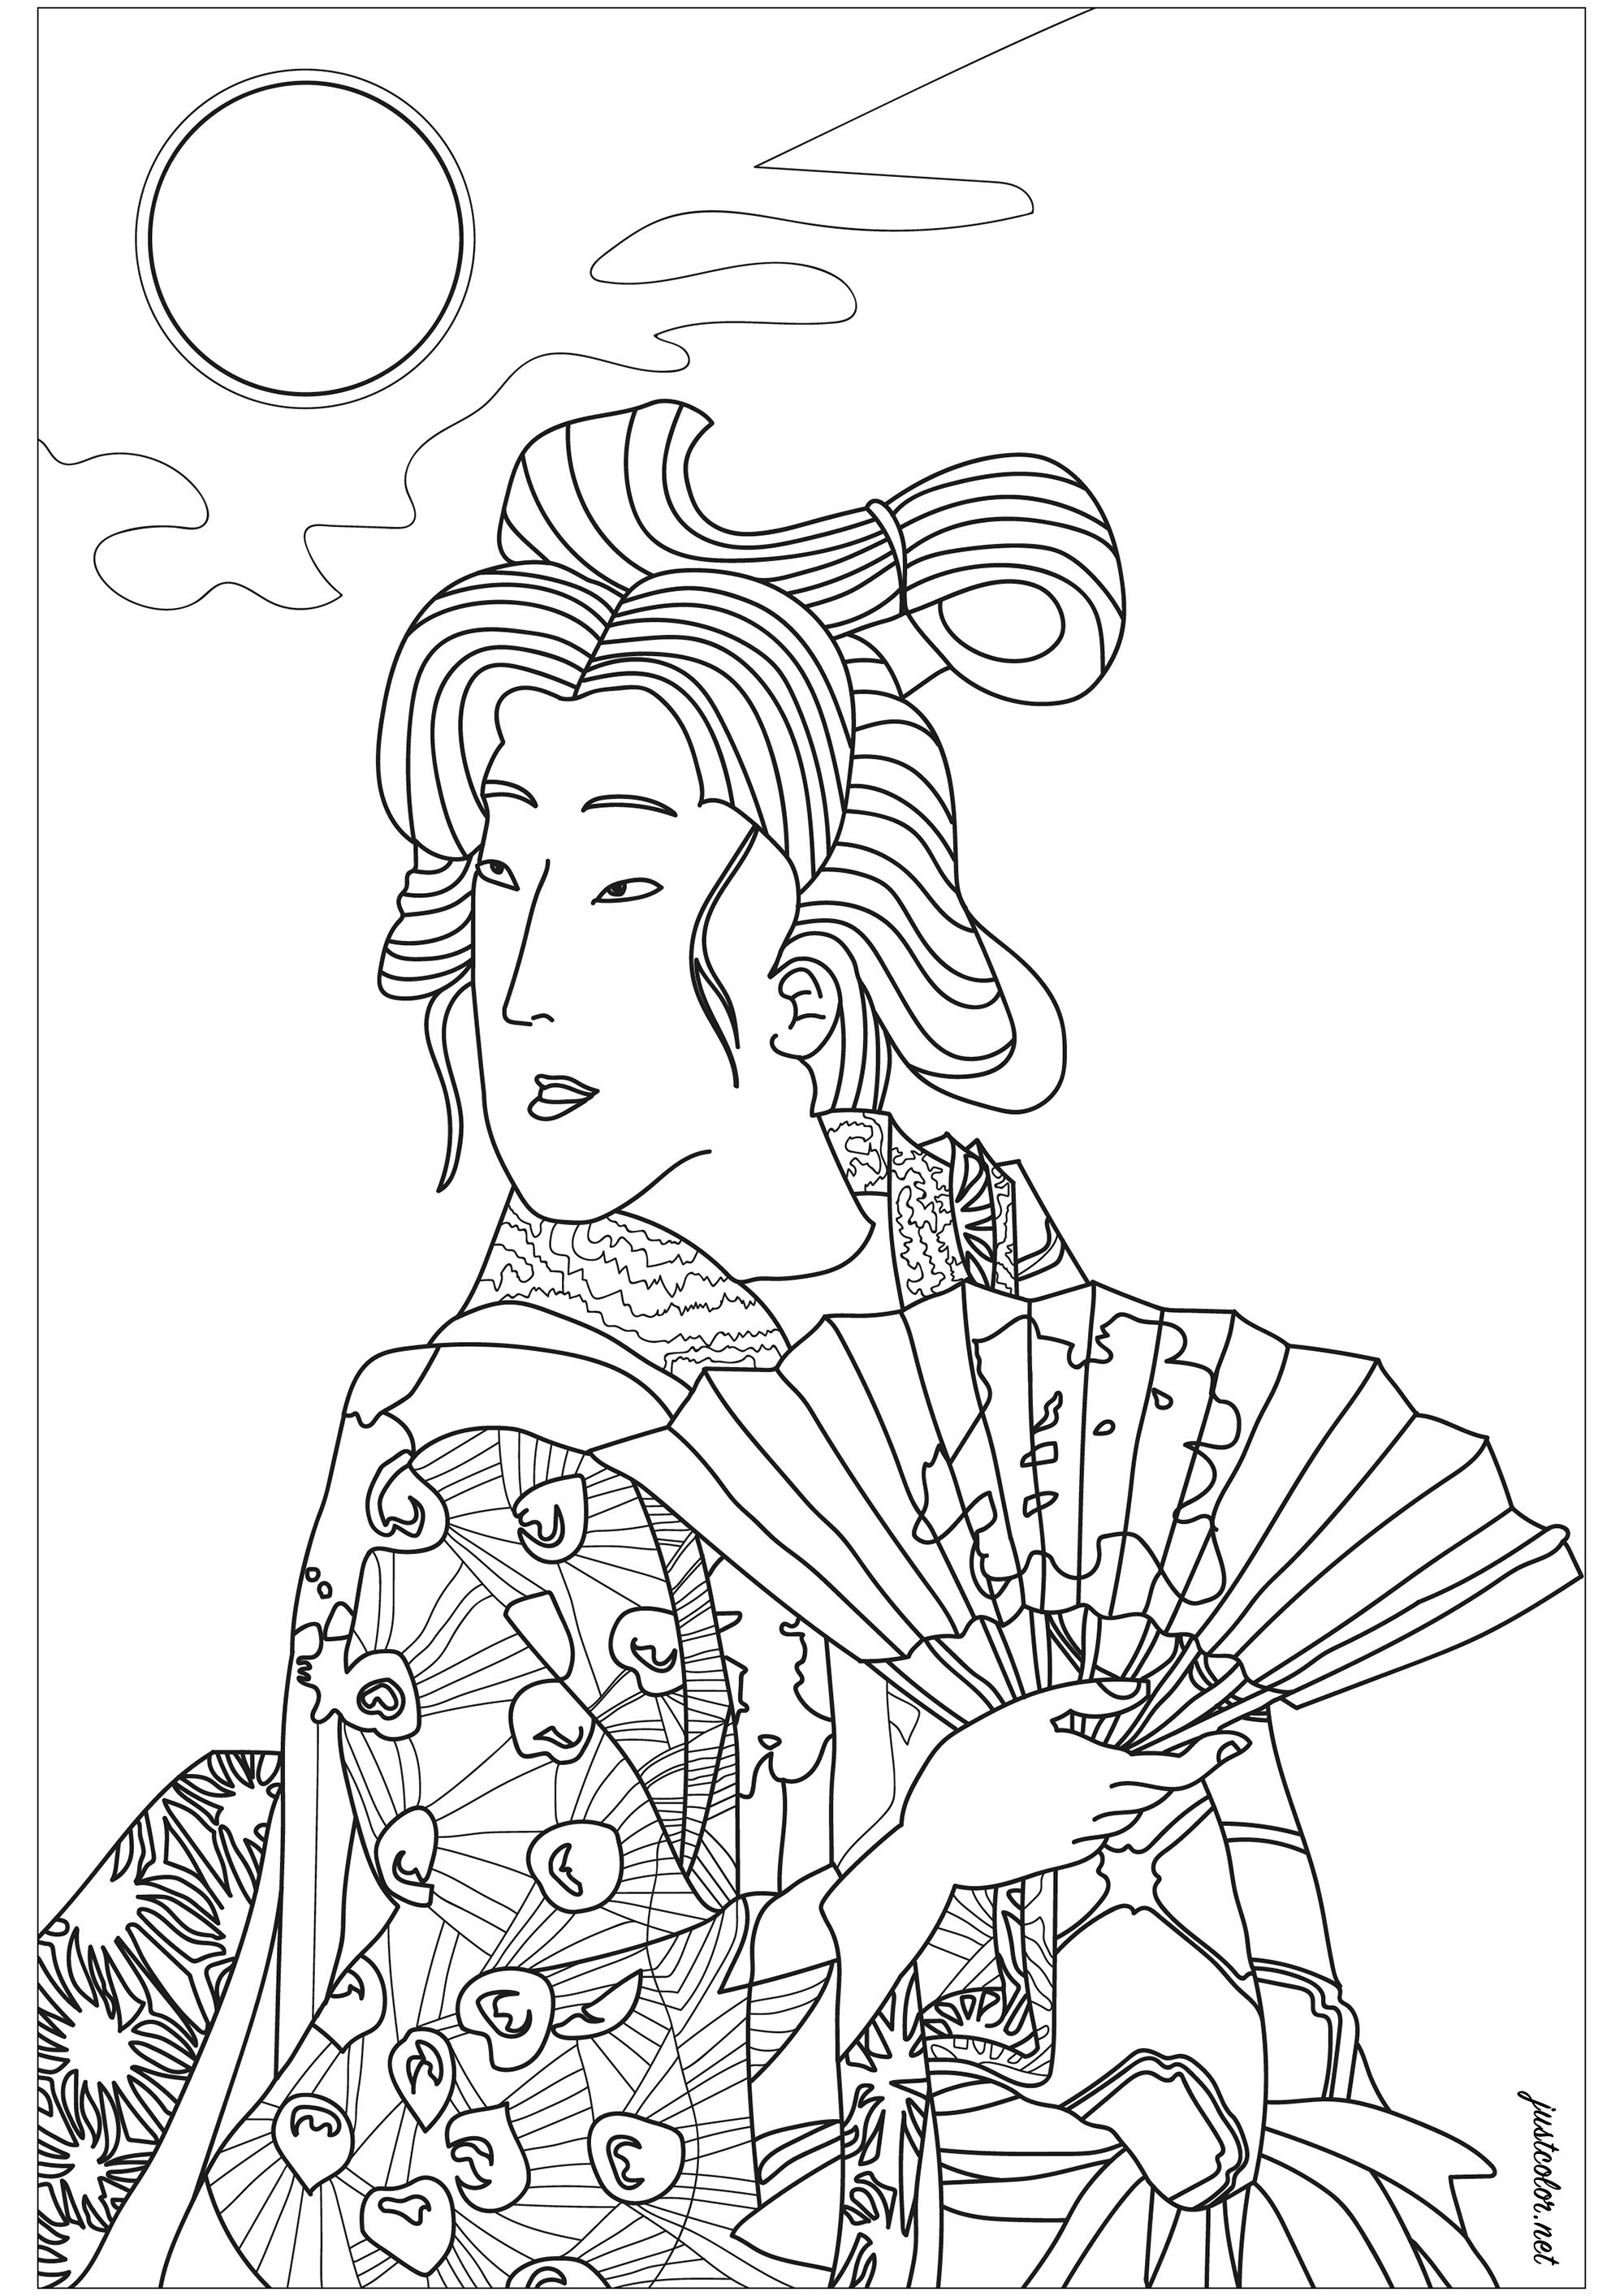 Geisha with a fan. Portrait of a Geisha from a 19th century Japanese print by Yoshitoshi depicting a woman in kimono holding her fan under a full moon.